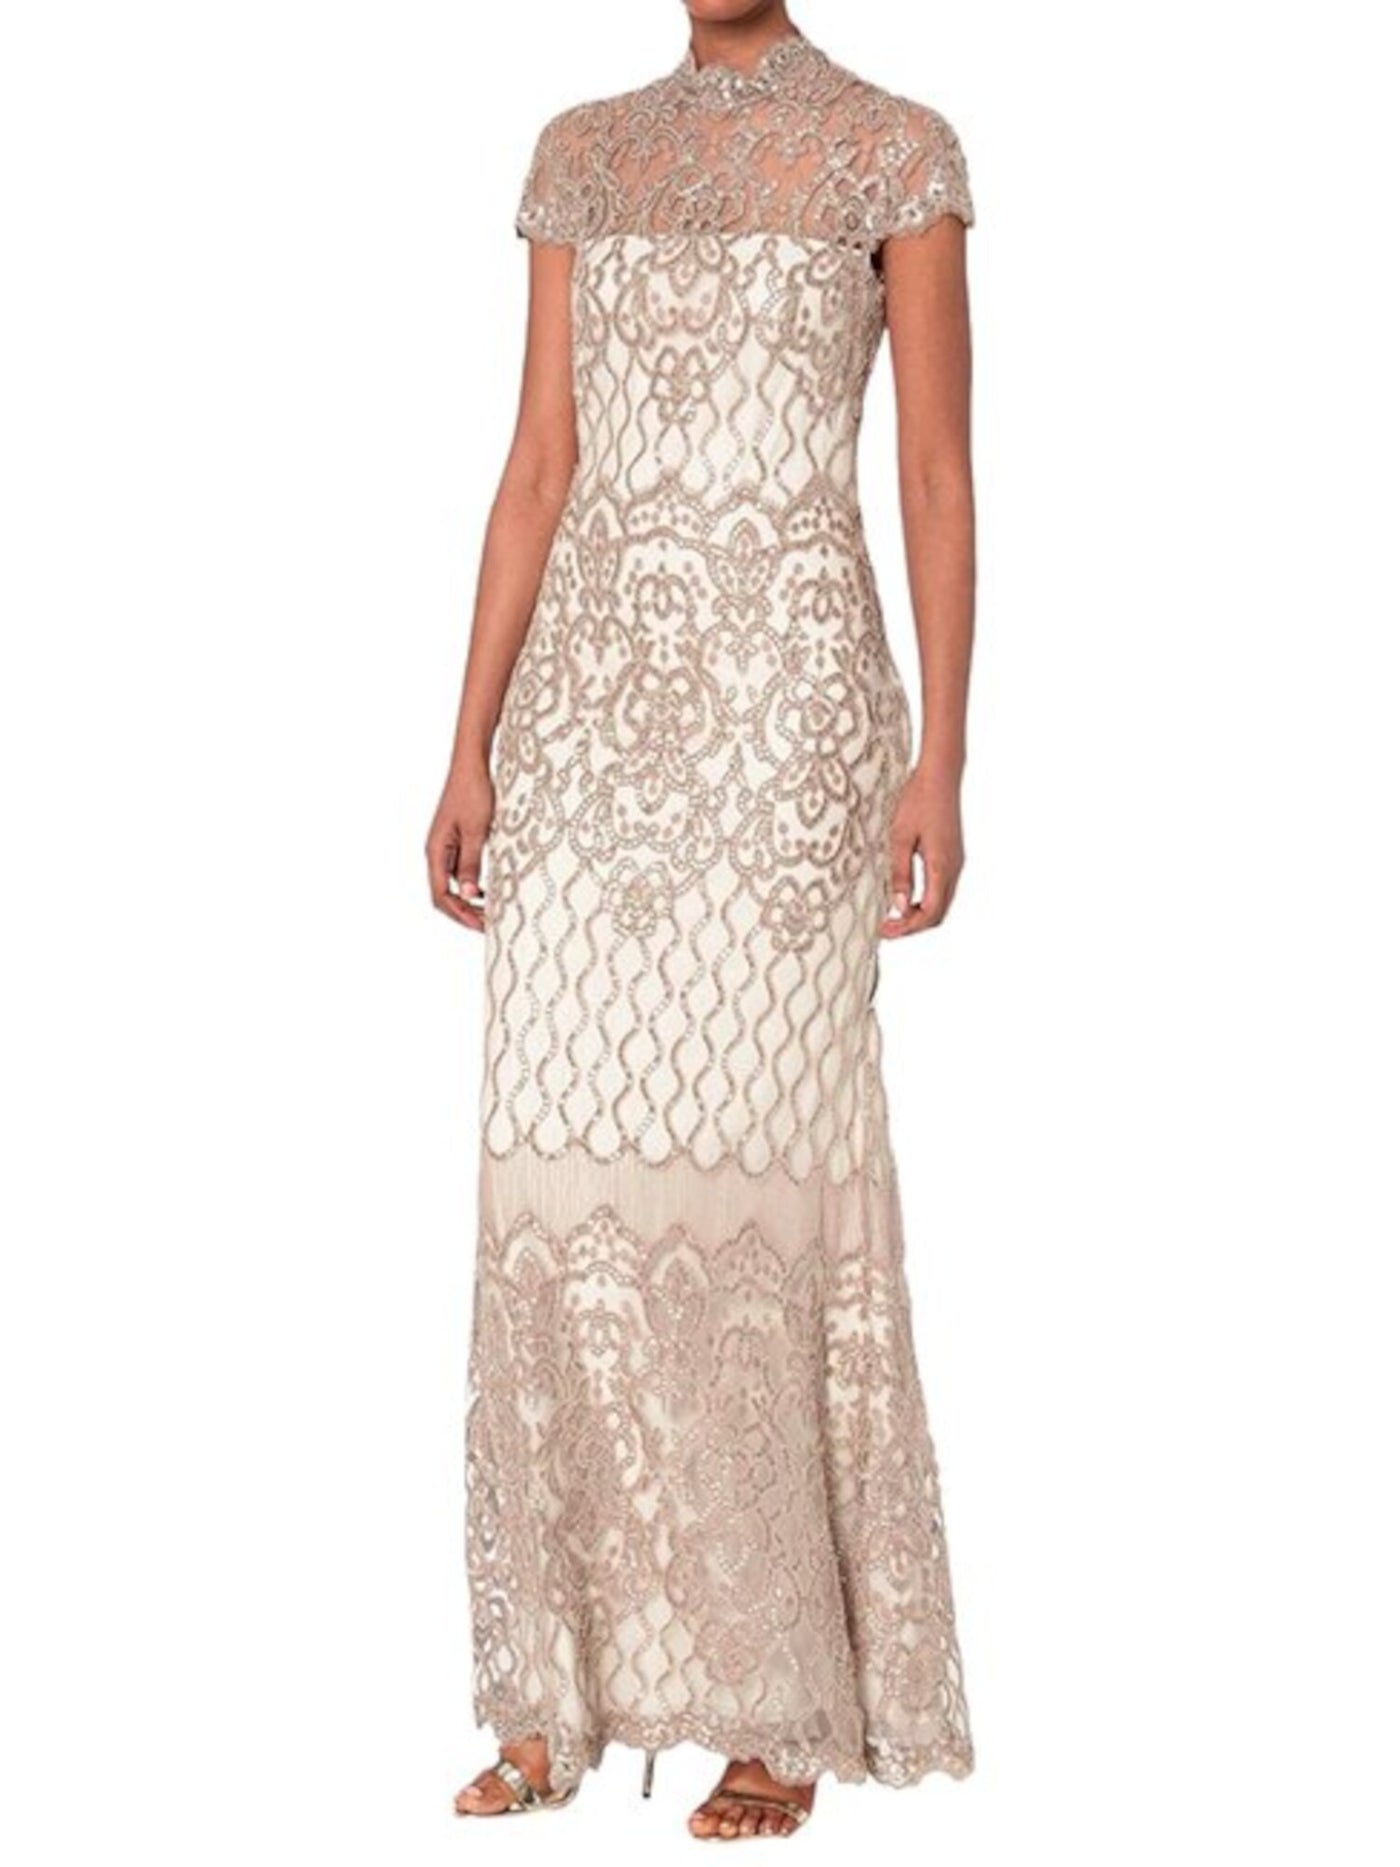 TADASHI SHOJI Womens Beige Sequined Embroidered Lace Sheer Zippered Lined Floral Cap Sleeve Mock Neck Full-Length Evening Gown Dress 2